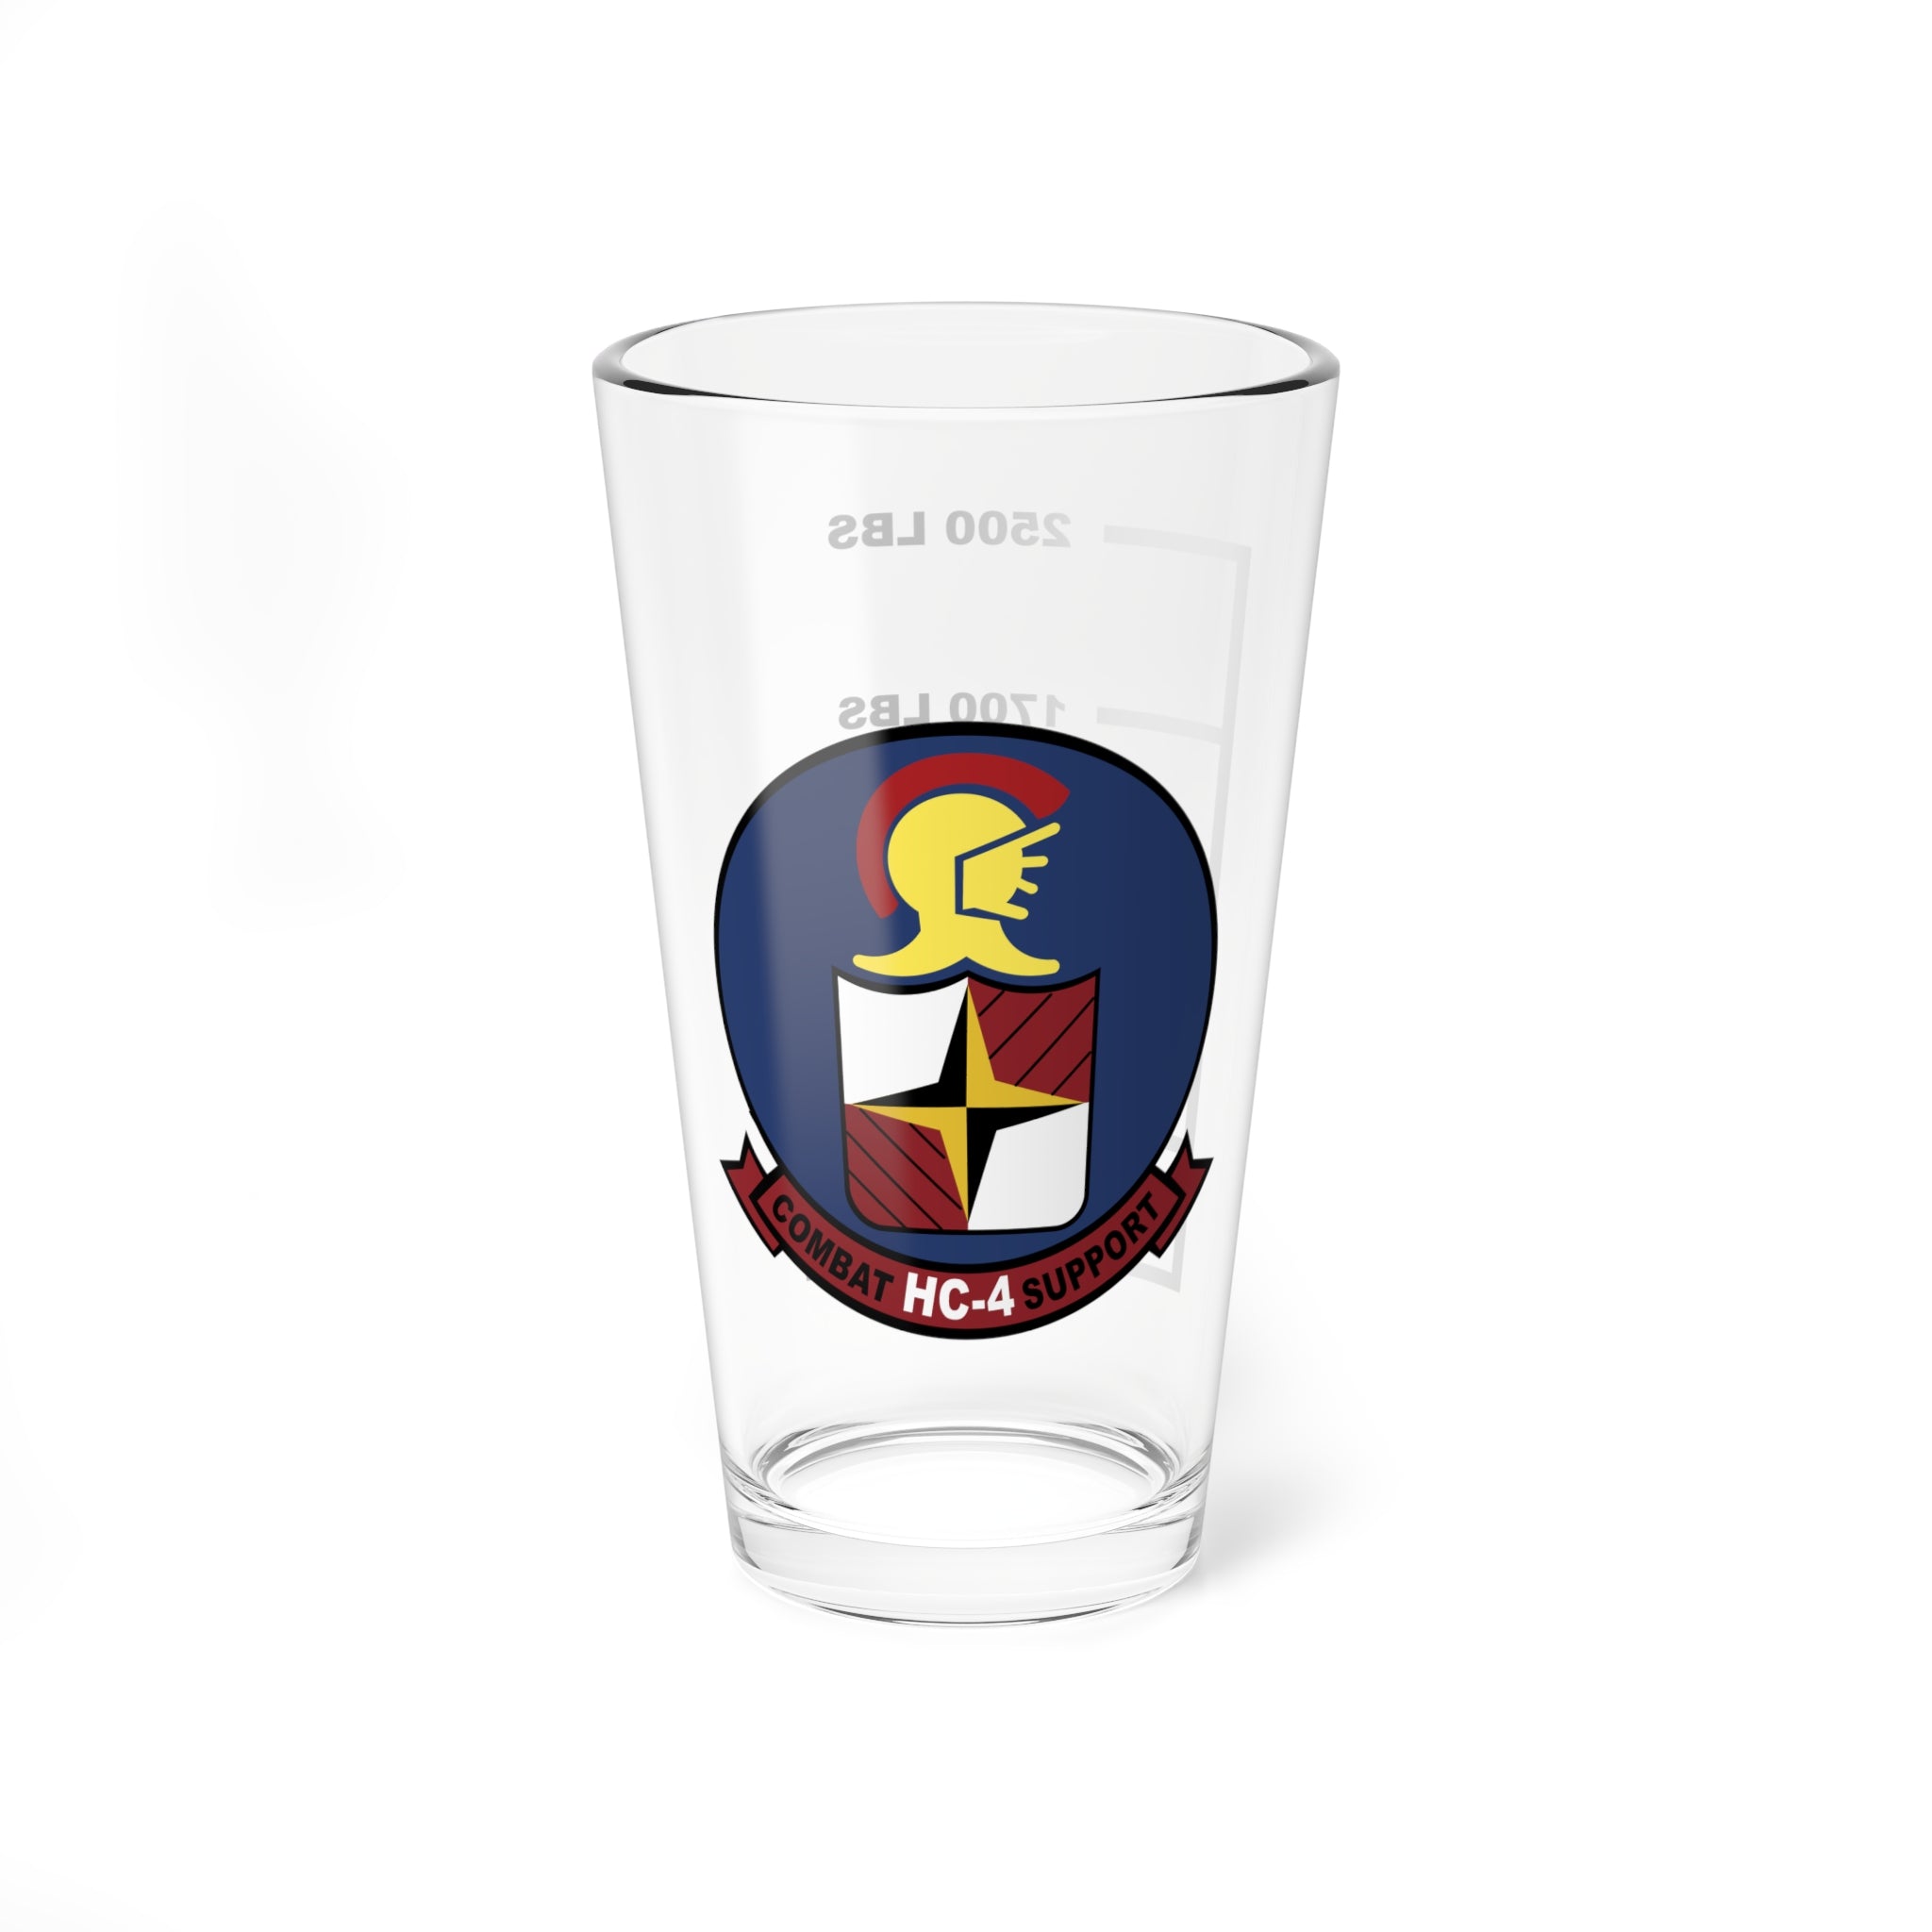 HC-4 [Legacy Logo]  "Black Stallions" Fuel Low Pint Glass, Navy Helicopter Support Squadron flying the UH-2 Seasprite